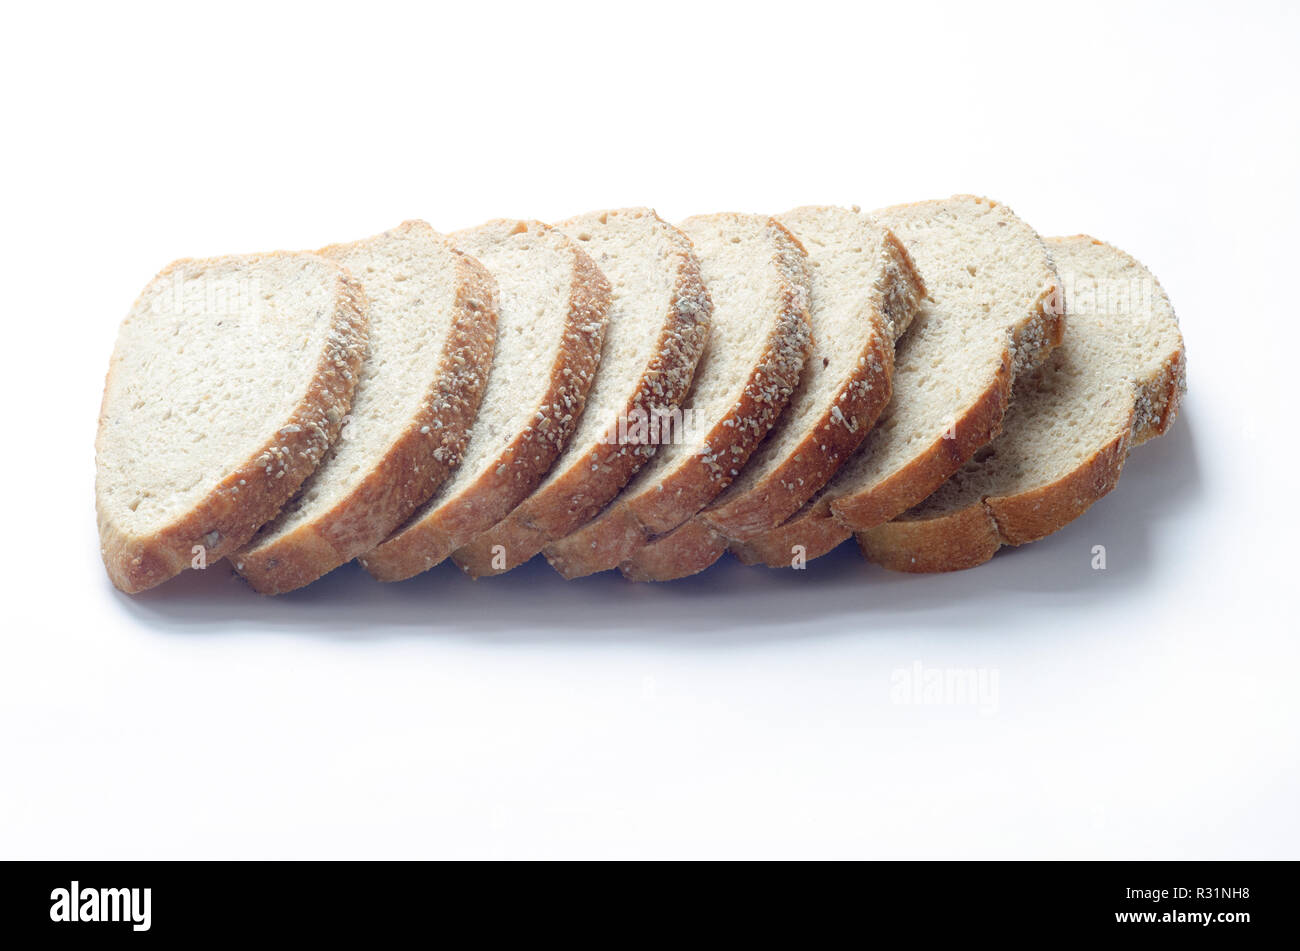 Ancient Grains Tuscan Pane sliced bread made with whole wheat and spelt flours, whole grains and flax seeds on white Stock Photo